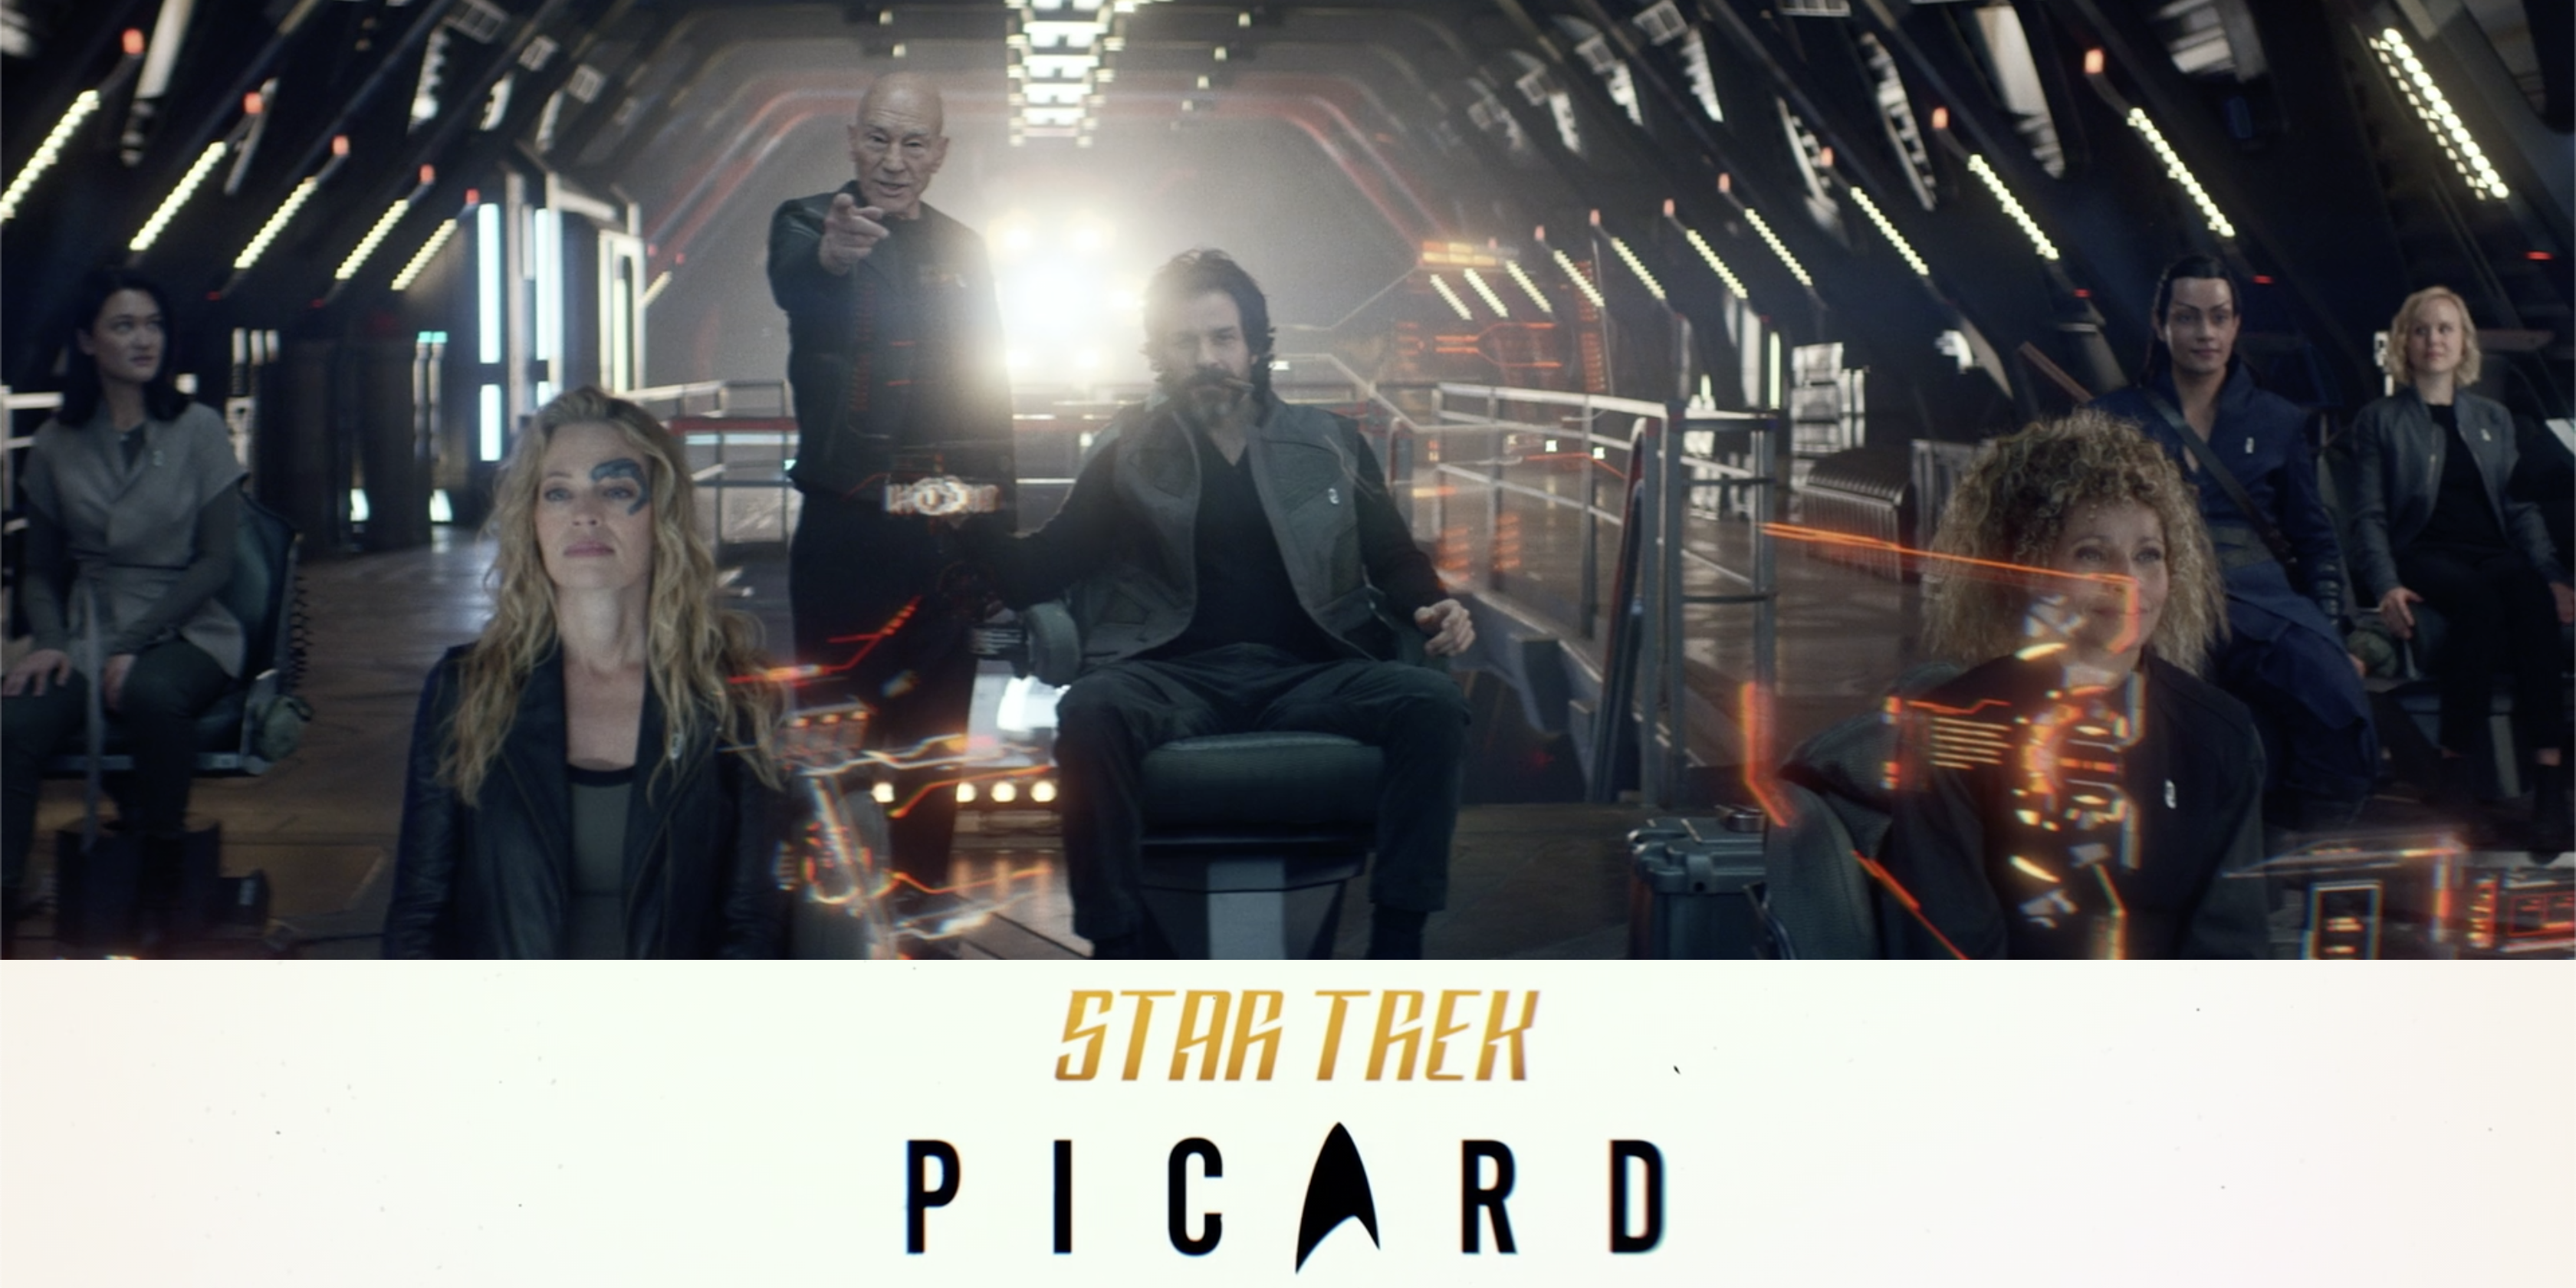 Weekly Sci Fi TV Top 5: Star Trek Picard Proves a Hit, Netflix Picks Up  Live-Action One Piece, and More - Cancelled Sci Fi